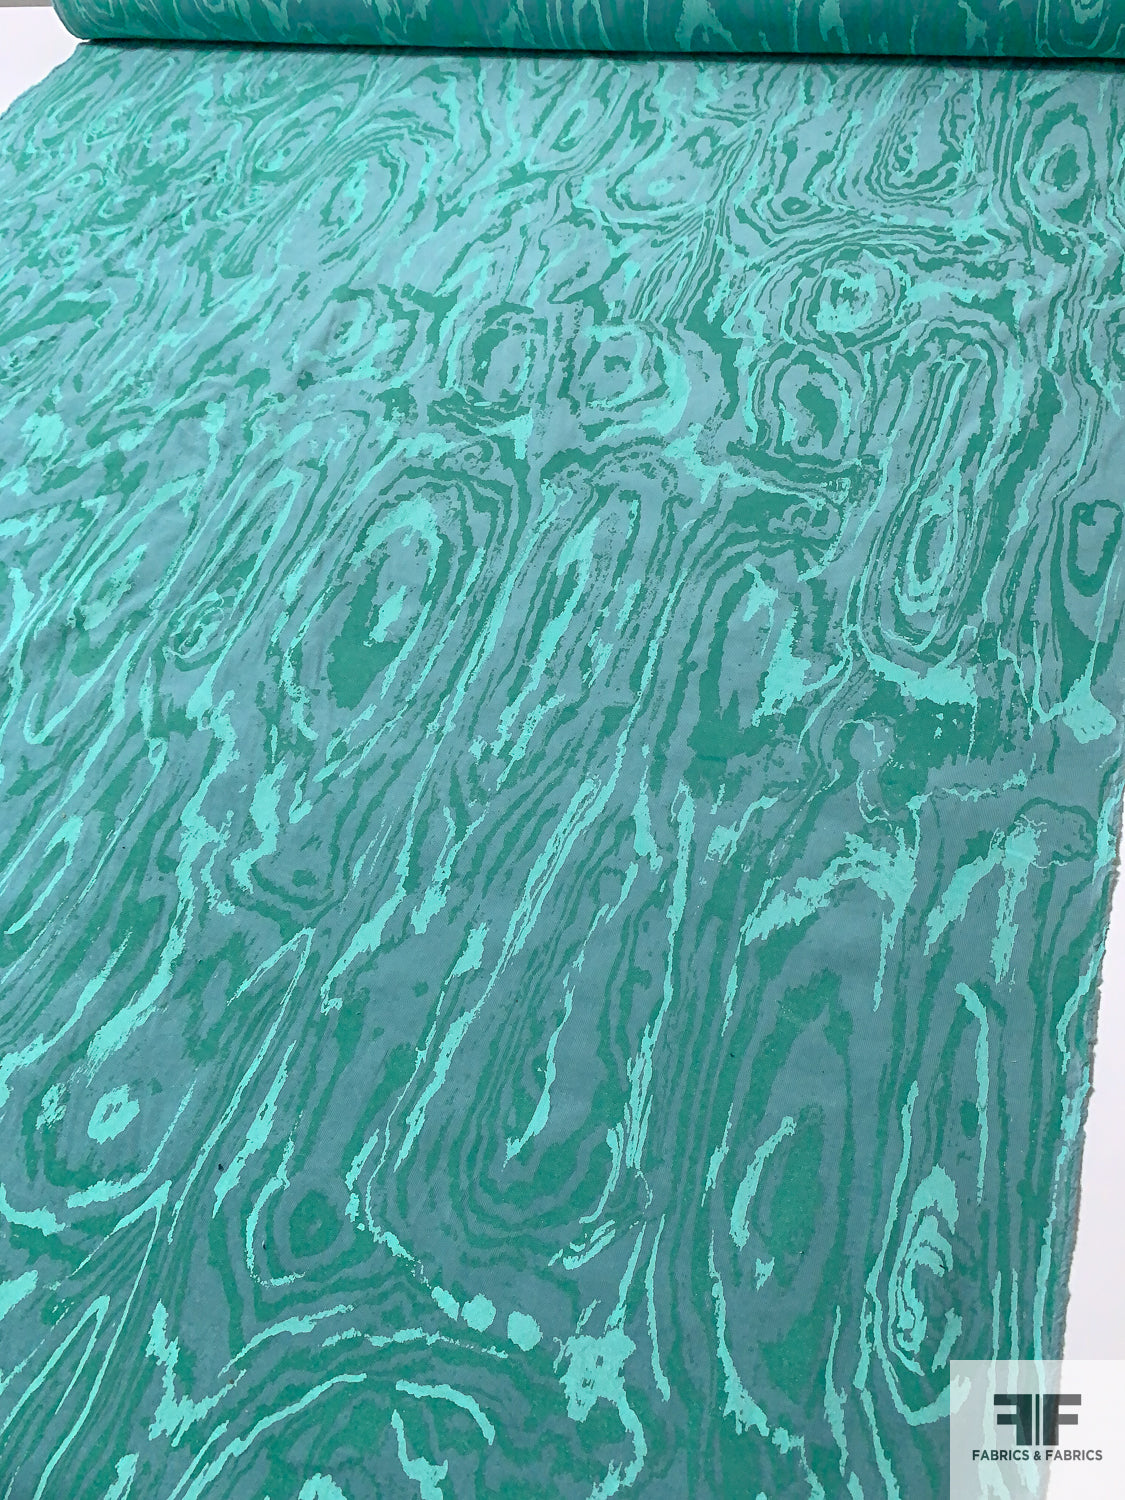 Wood Grain Printed Pinwale Stretch Cotton Corduroy with Glitter Detail - Ocean Greens